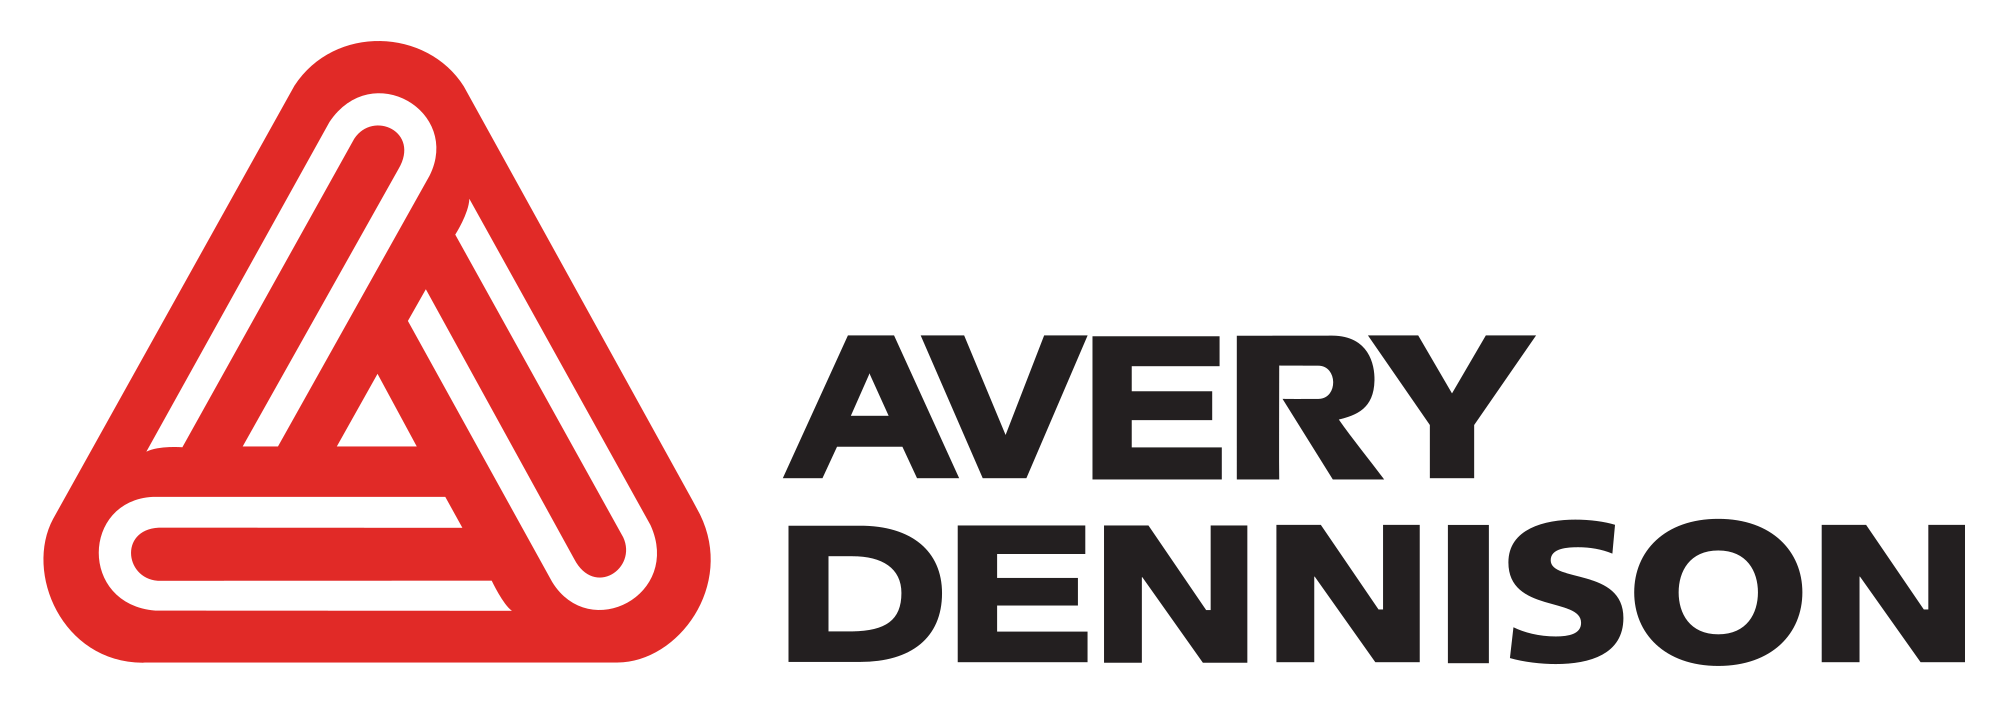 Avery Dennison PNG - 114734